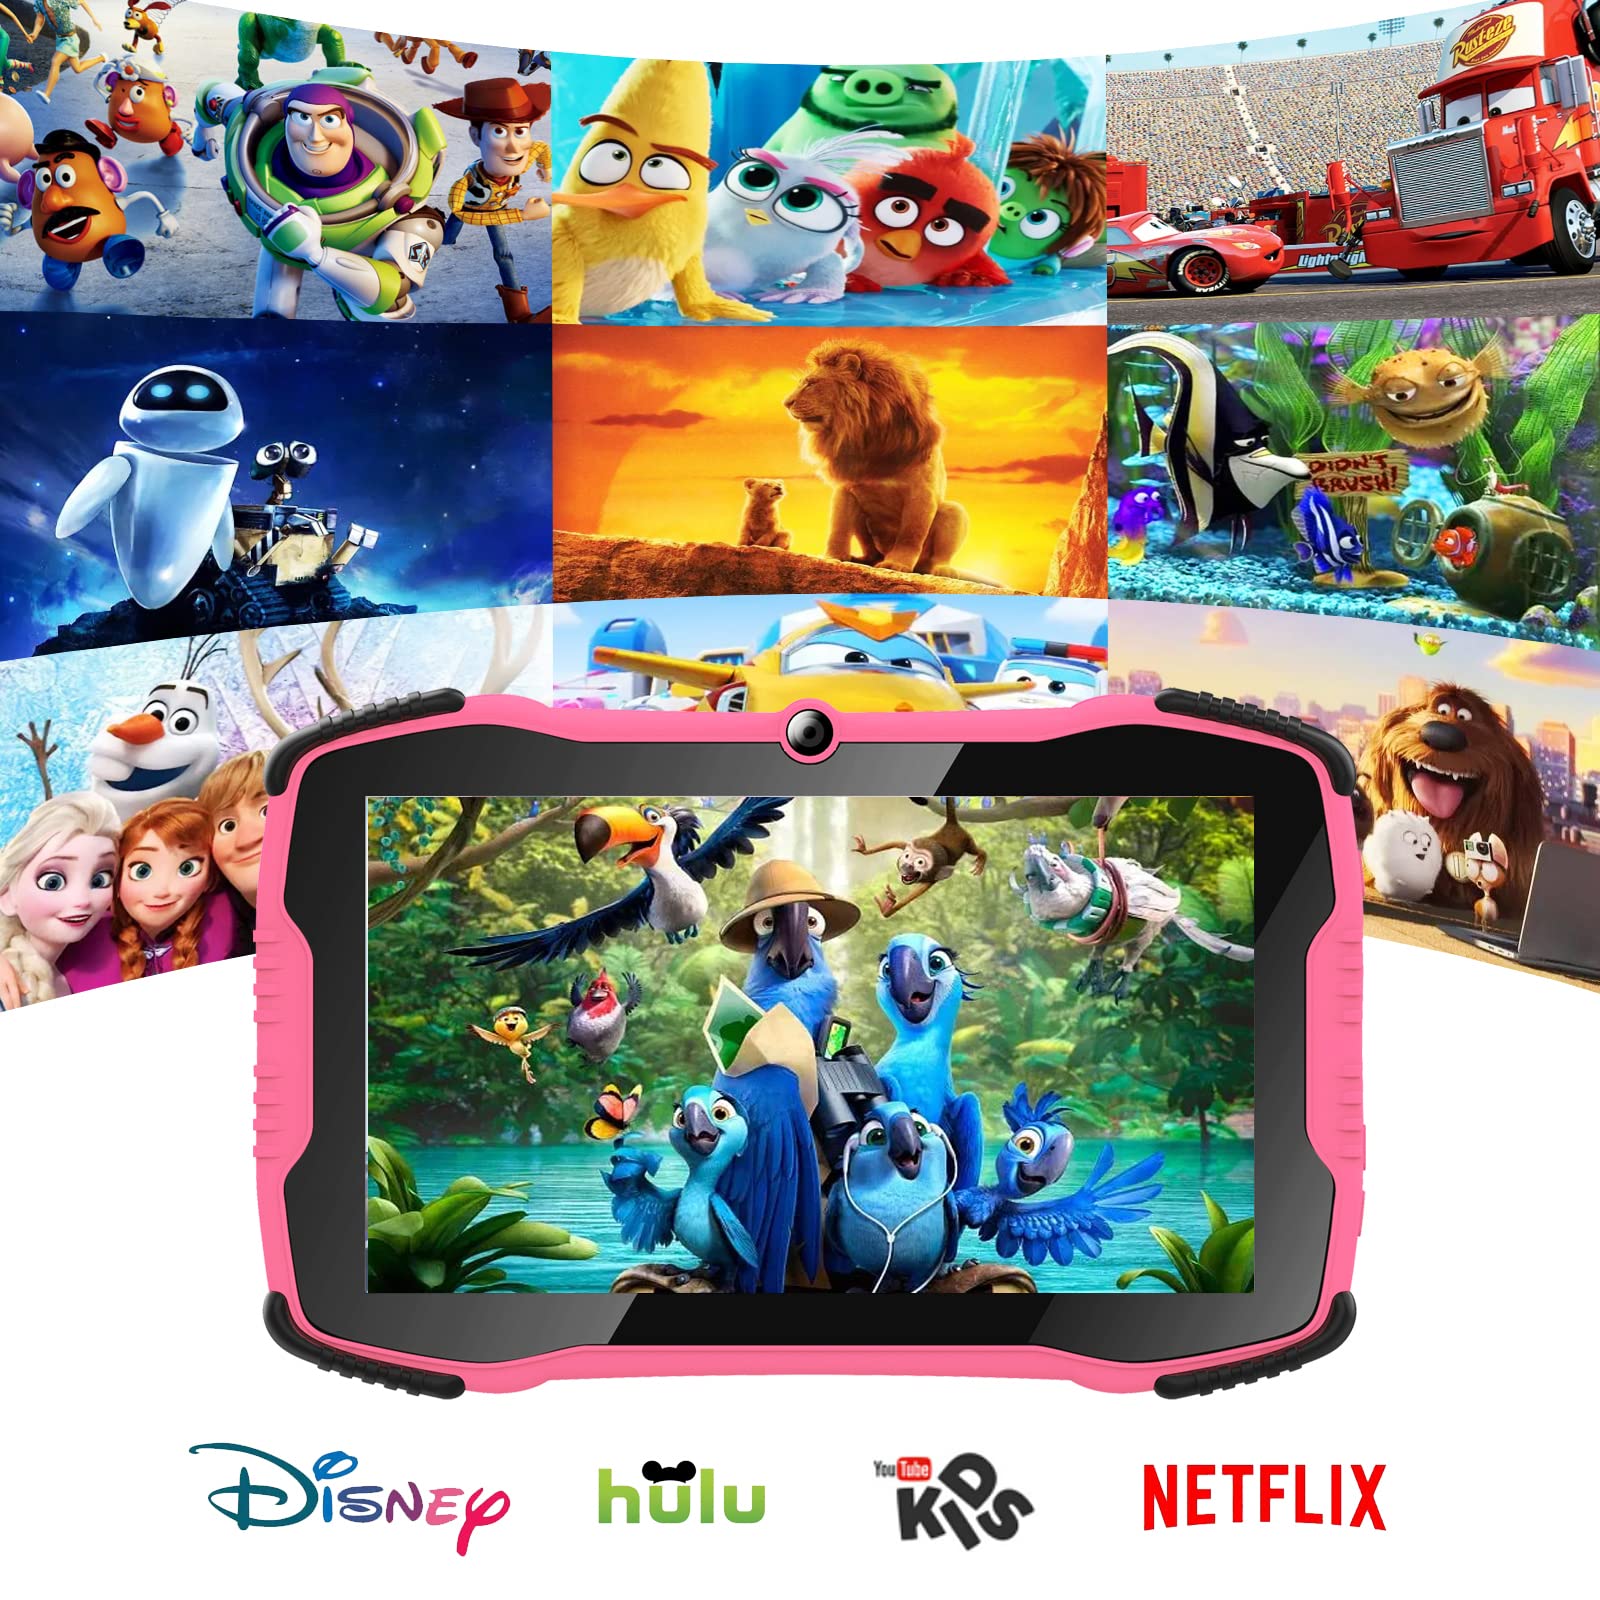 Kids Tablet 7 inch Tablet for Kids 2GB 32GB Android 11.0 Toddler Tablet for Toddlers,Childrens Tablet with WiFi Dual Camera Kid-Proof Case Kids Learning Tablet Parental Control YouTube Netflix